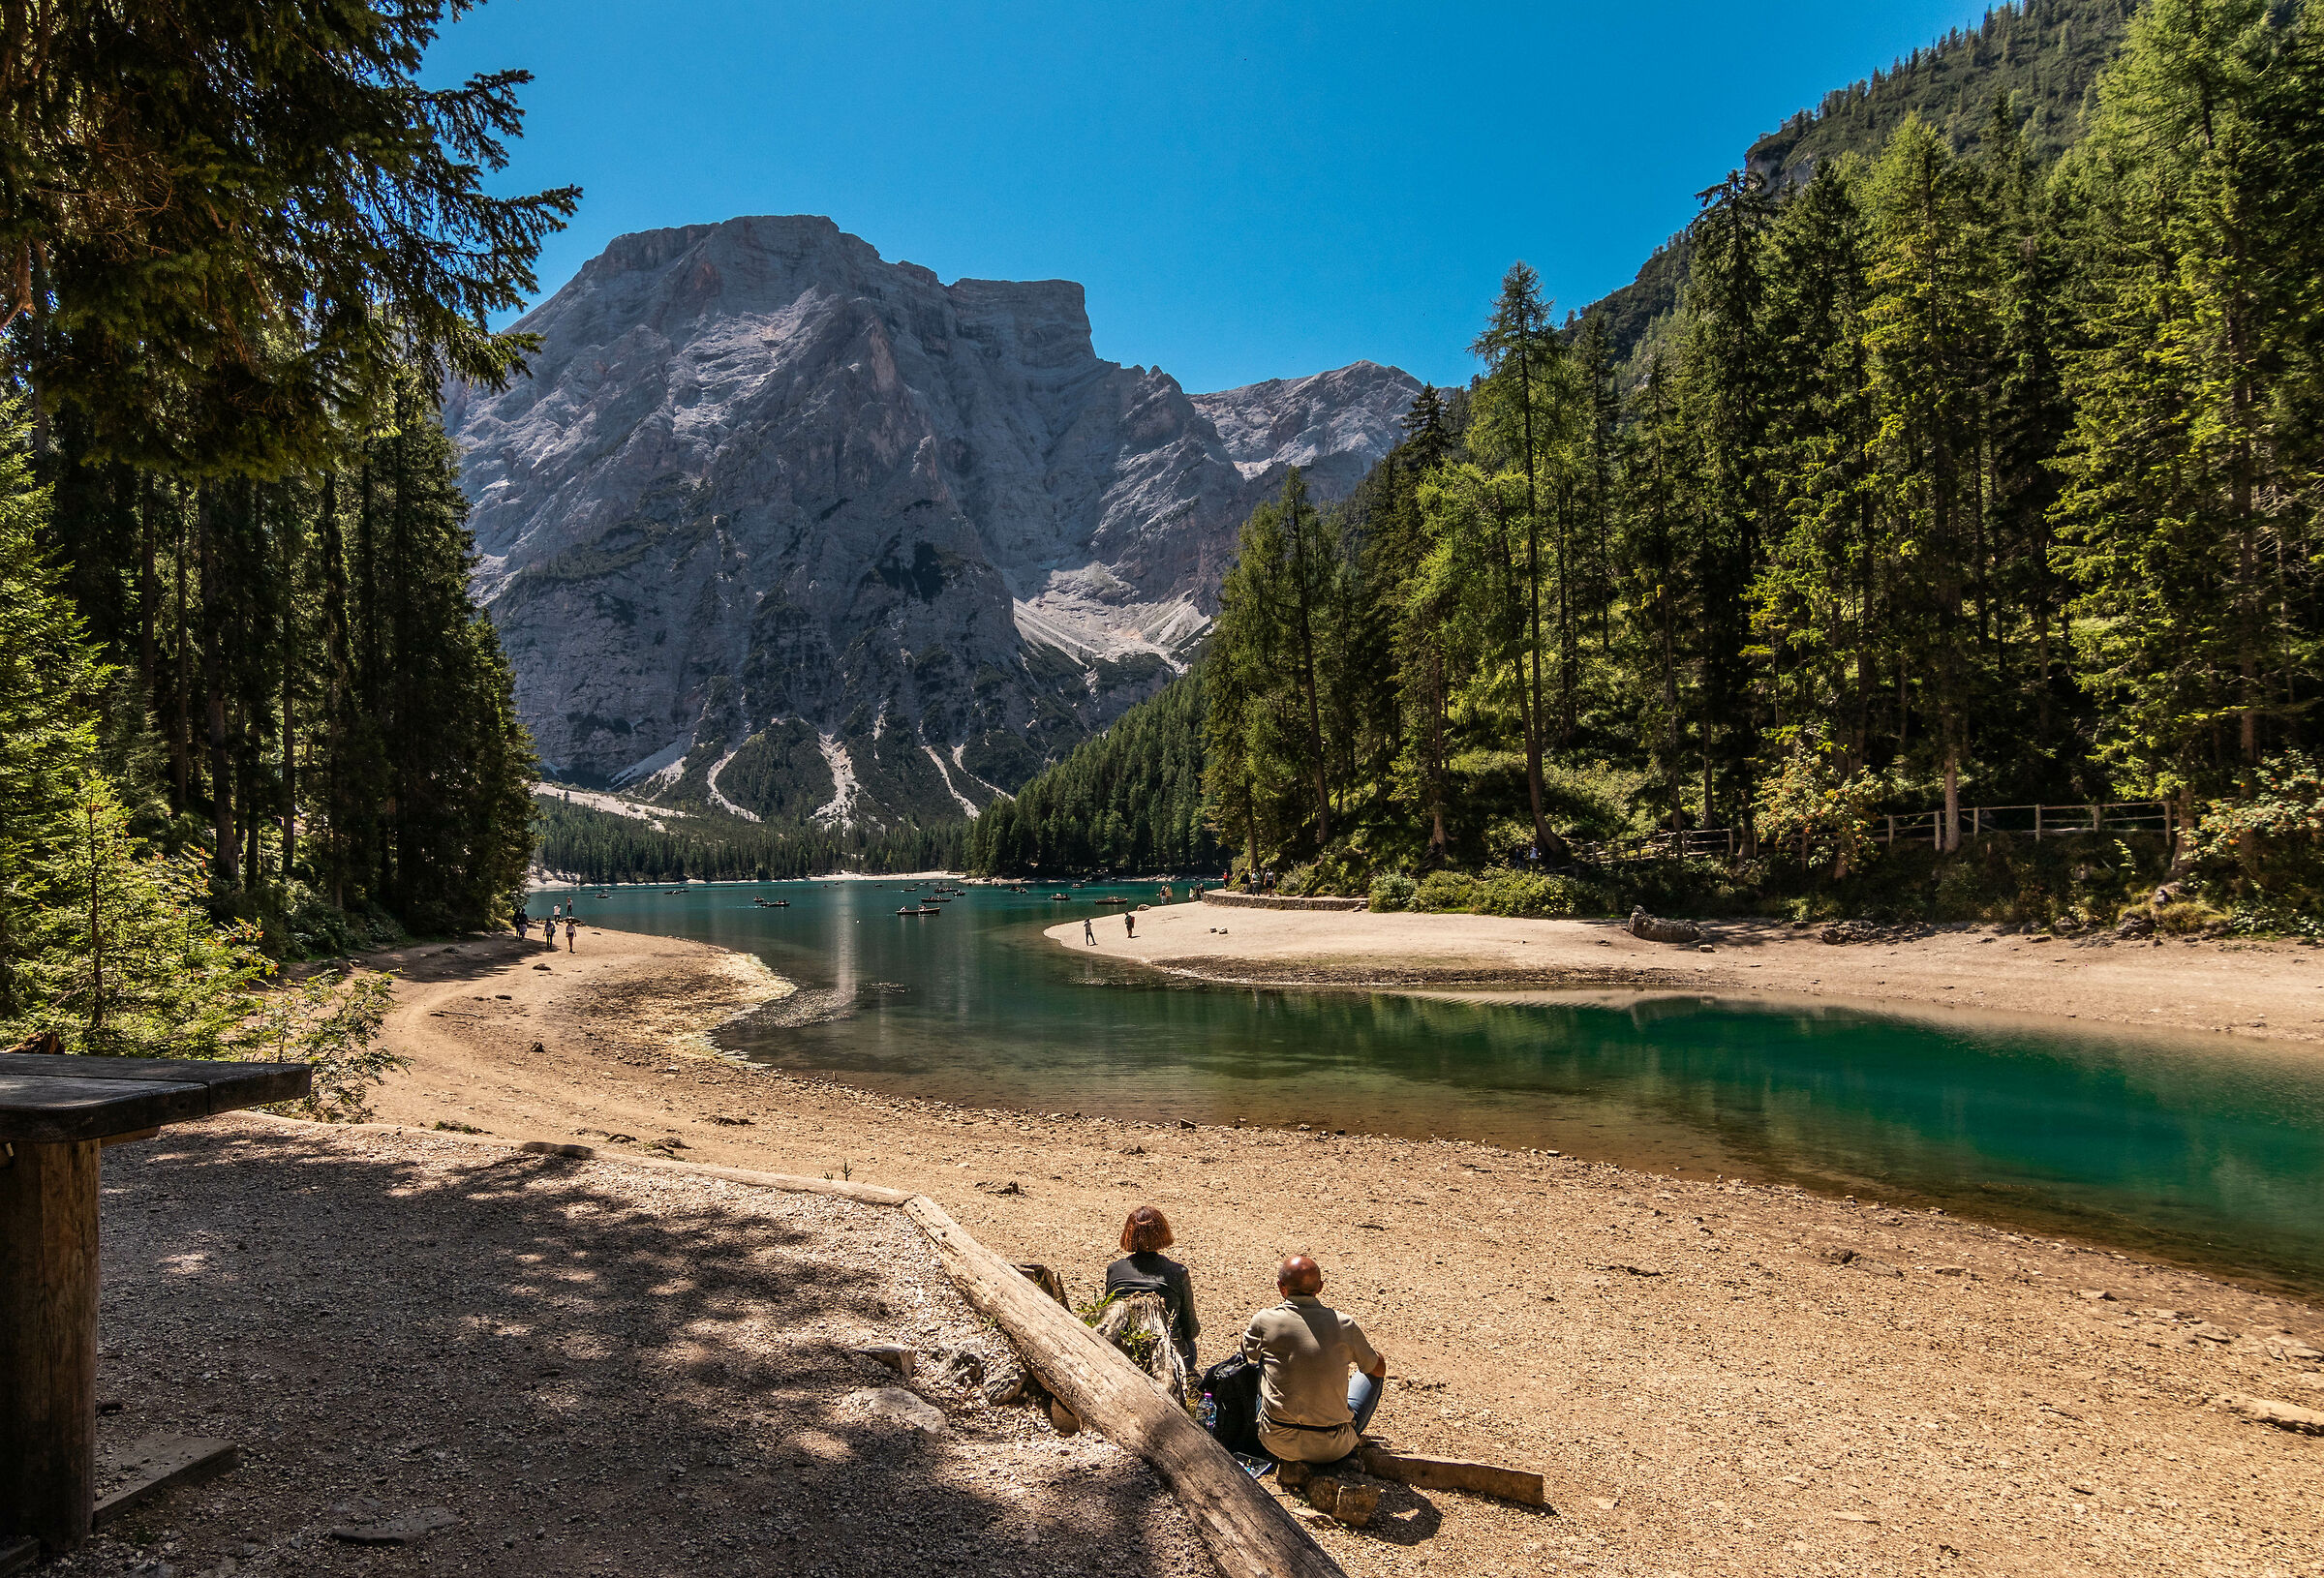 In Braies.... relaxation...